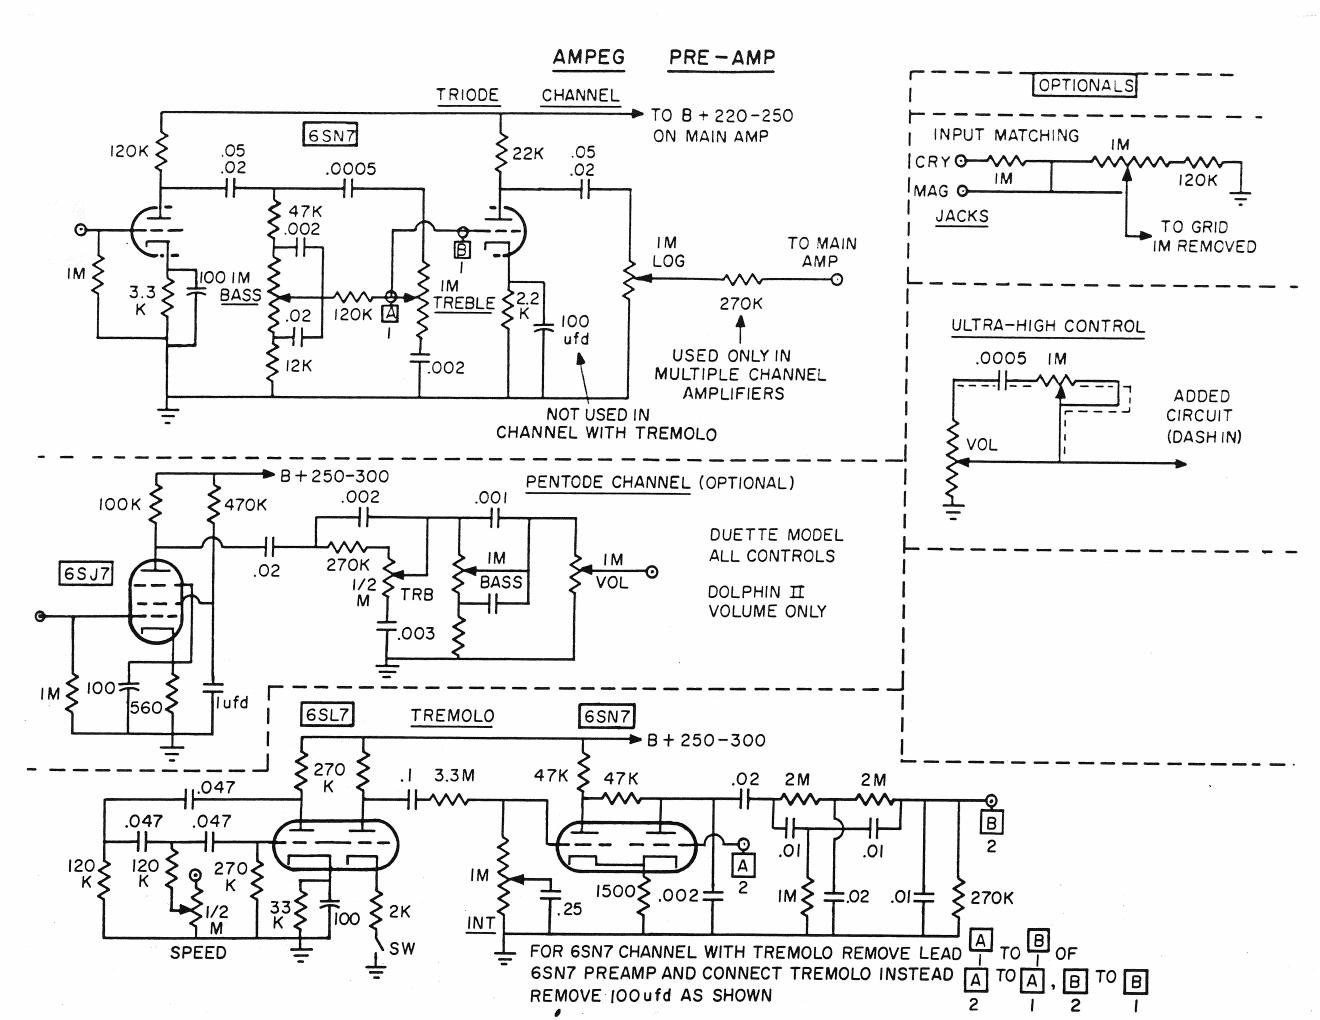 ampeg duette dolphin ii preamp schematic